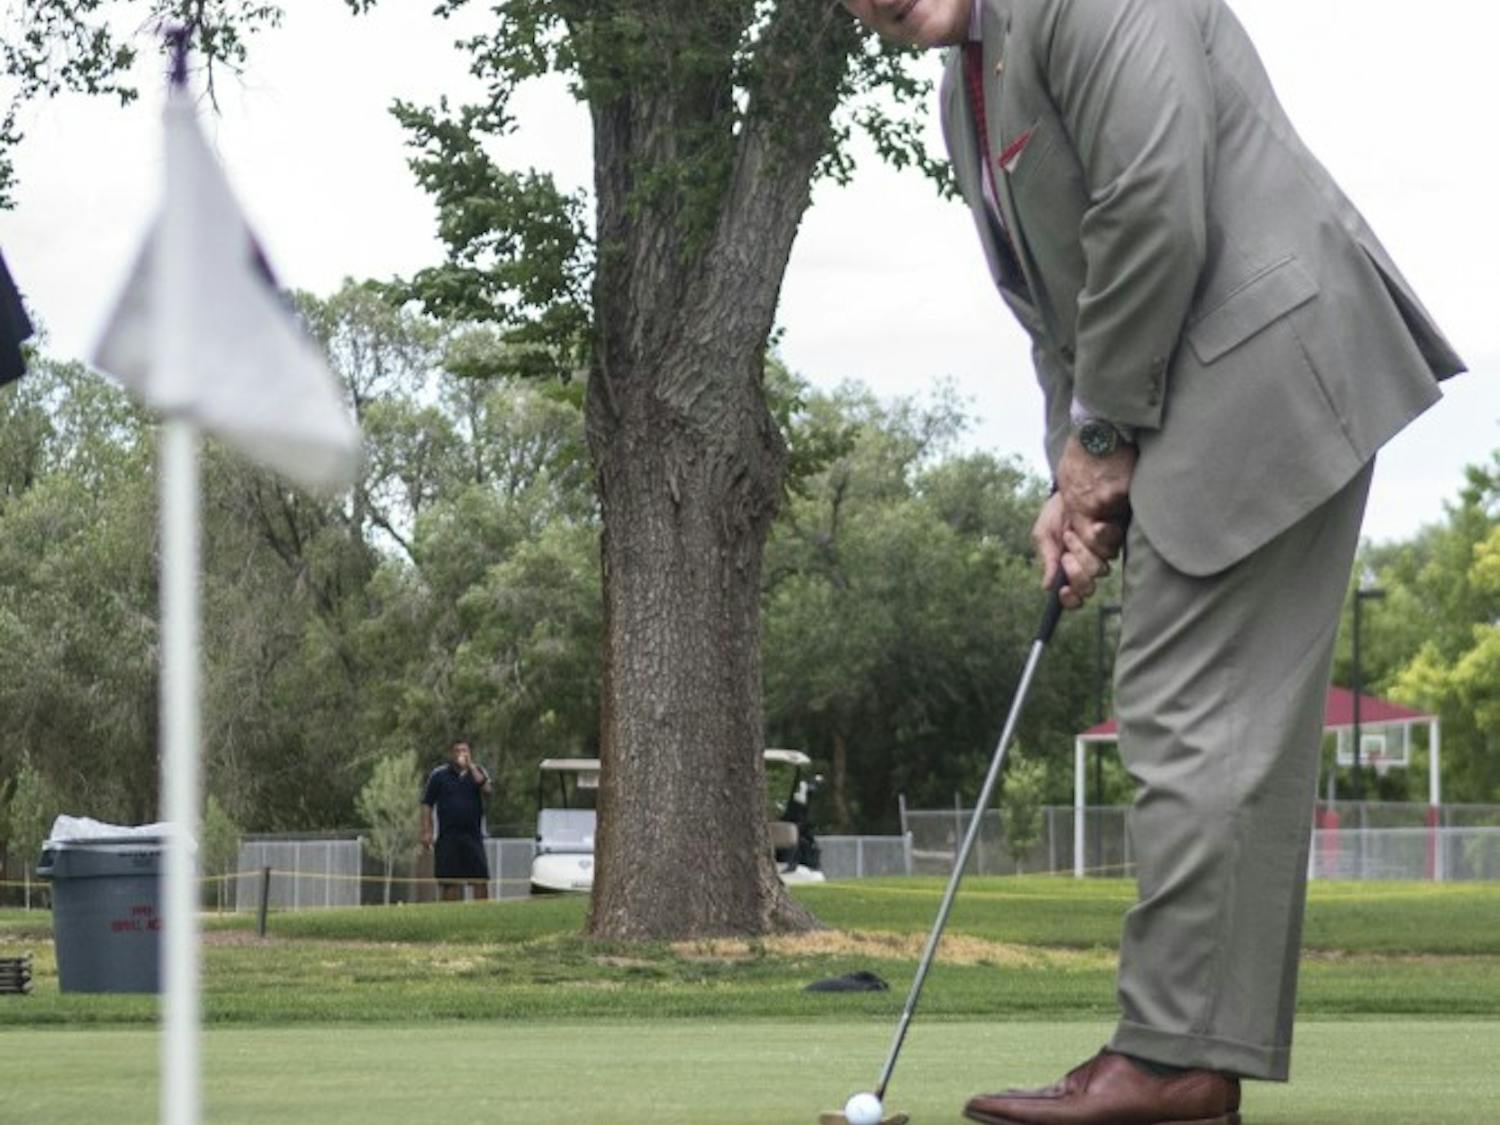 	UNM President Robert Frank putts during the opening ceremony of the North Campus golf course Friday afternoon. Representatives from the University, Bernalillo County and the north campus neighborhood gathered to celebrate course renovations. Frank said the improvements will help with water conservation and demonstrate effective collaboration between the University, the county and the surrounding community. 

	“We’re thrilled that we reached this accomplishment,” he said. “We have many more accomplishments that we want to do with Bernalillo County in the future.”

	Tim Davis, vice president of the North Campus Neighborhood Association, said the project should save millions of gallons of water. Golf course revenue has gone up 30 percent this year, he said, with an average of 500 people per day using the area.

	“A significant piece of the identity of the UNM campus is in the process of being restored,” he said. 